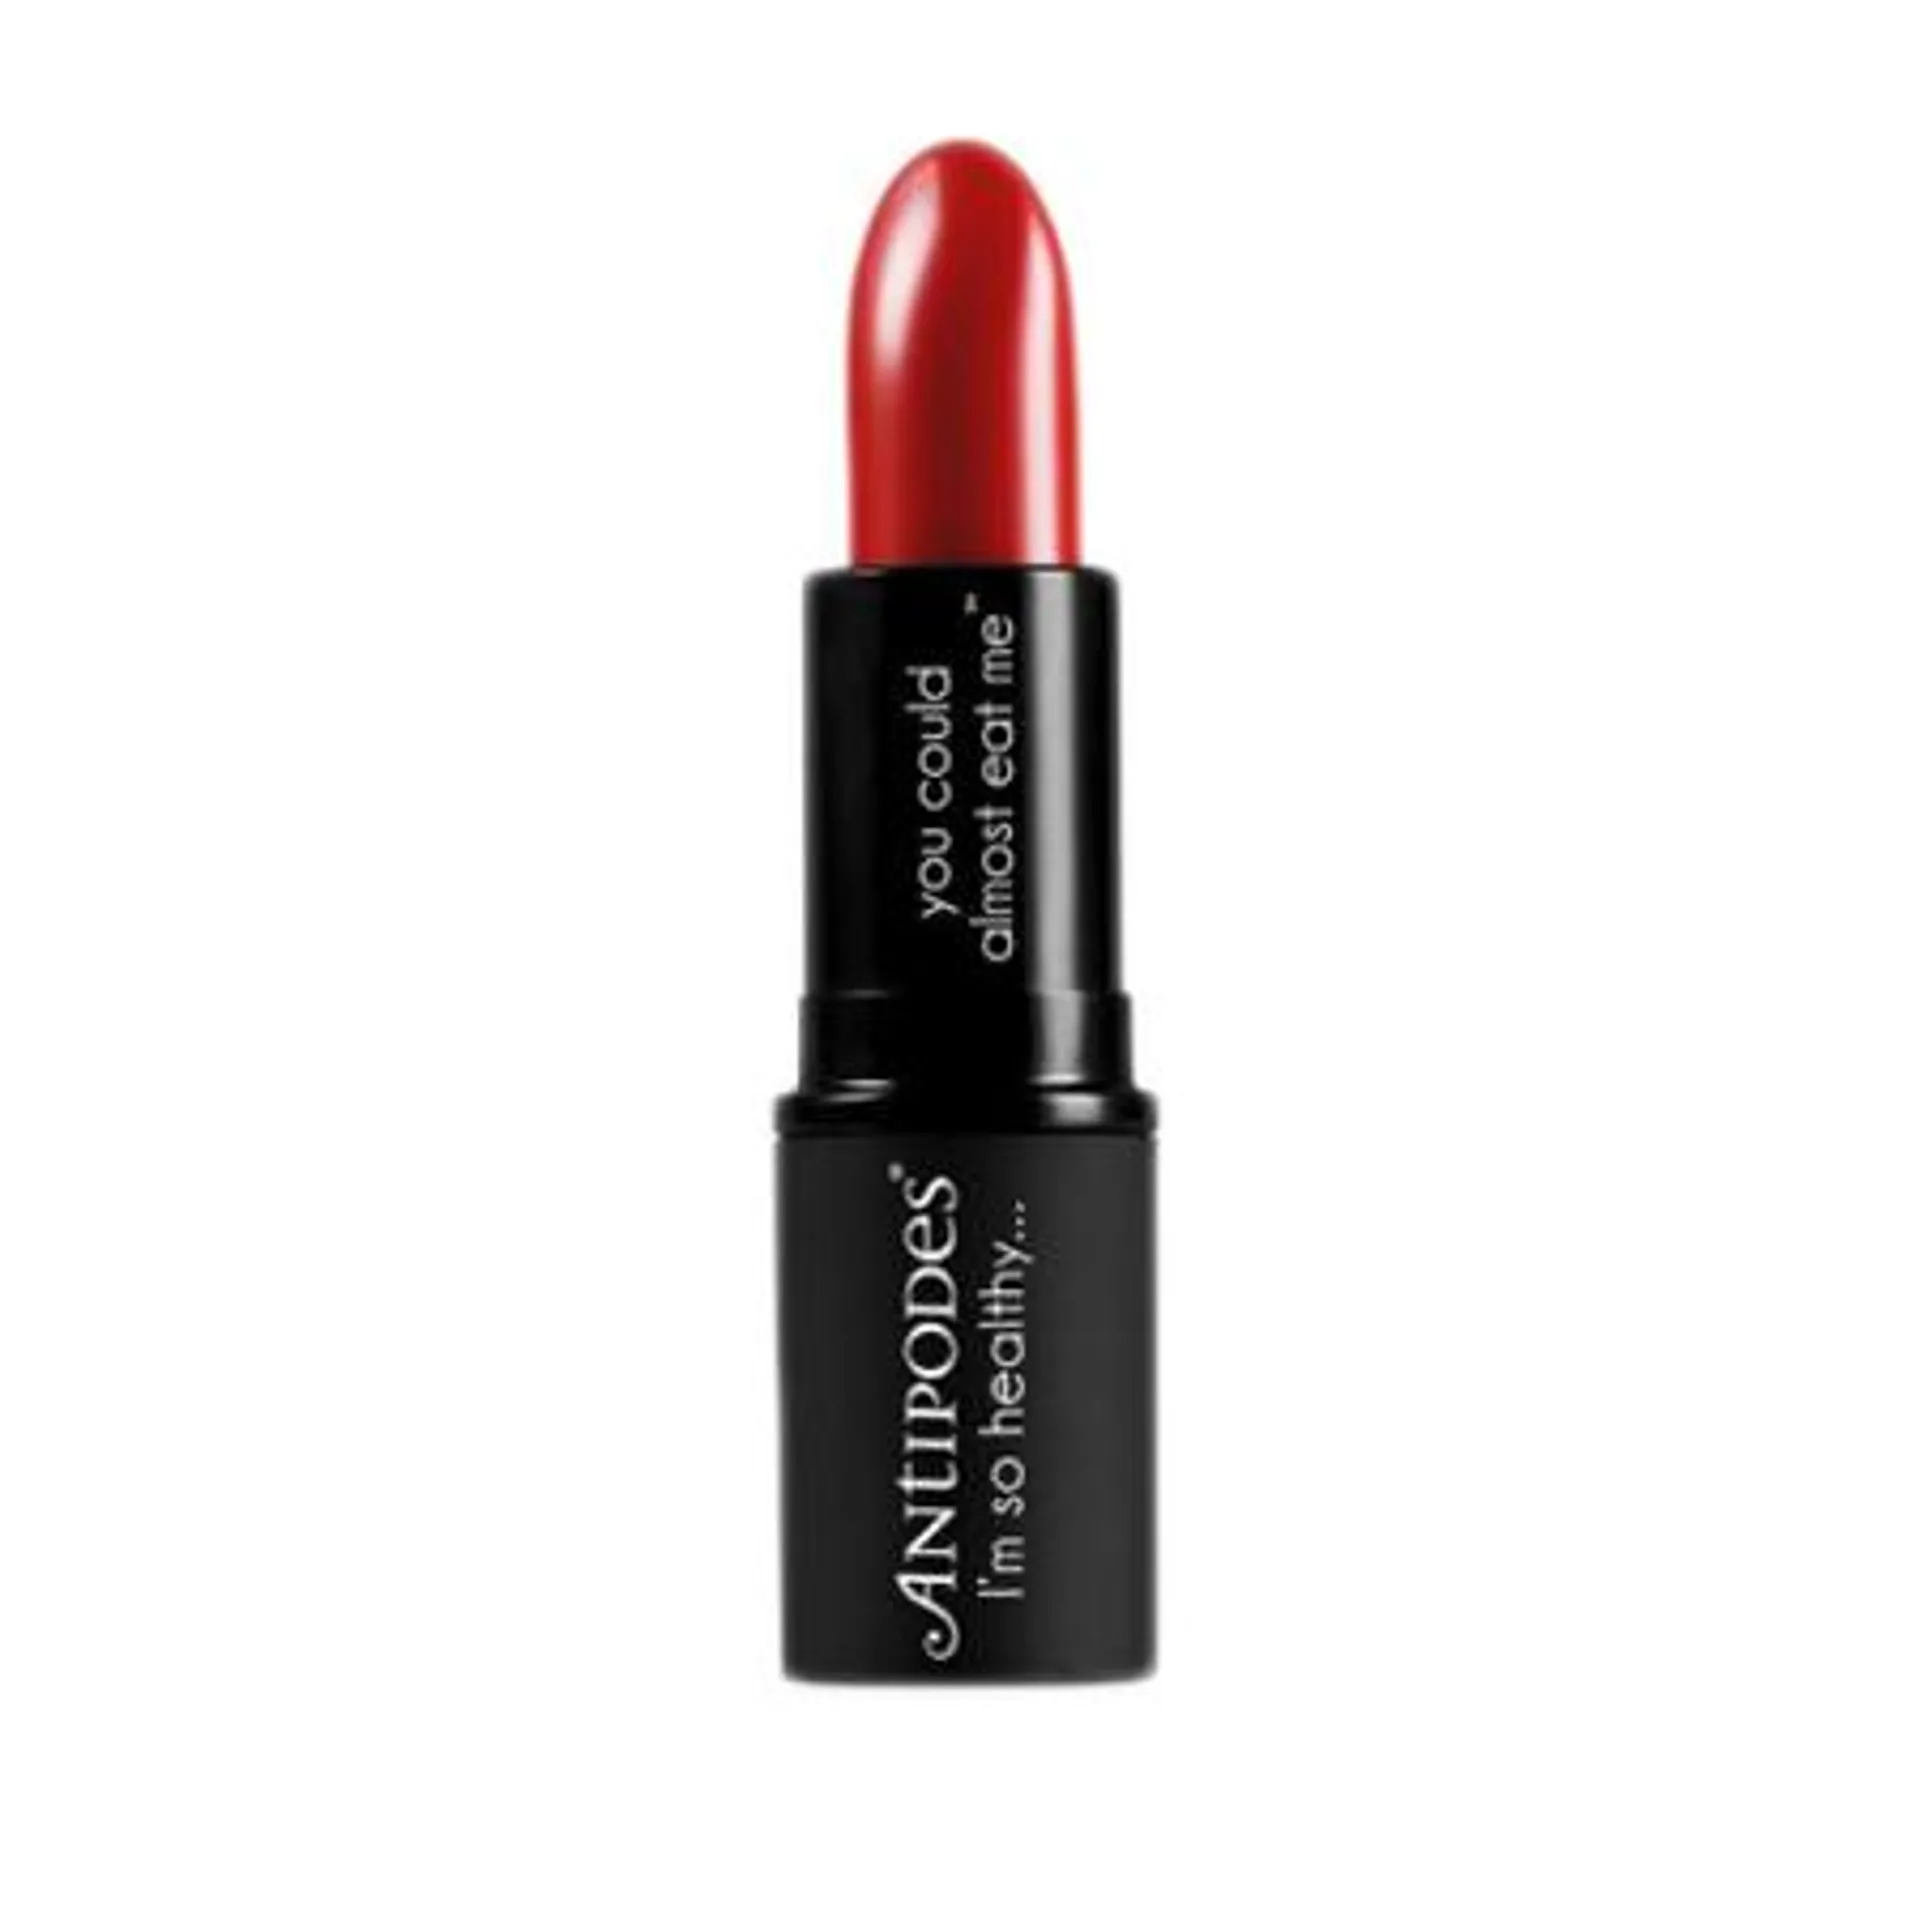 Antipodes Lipstick - Ruby Bay Rouge